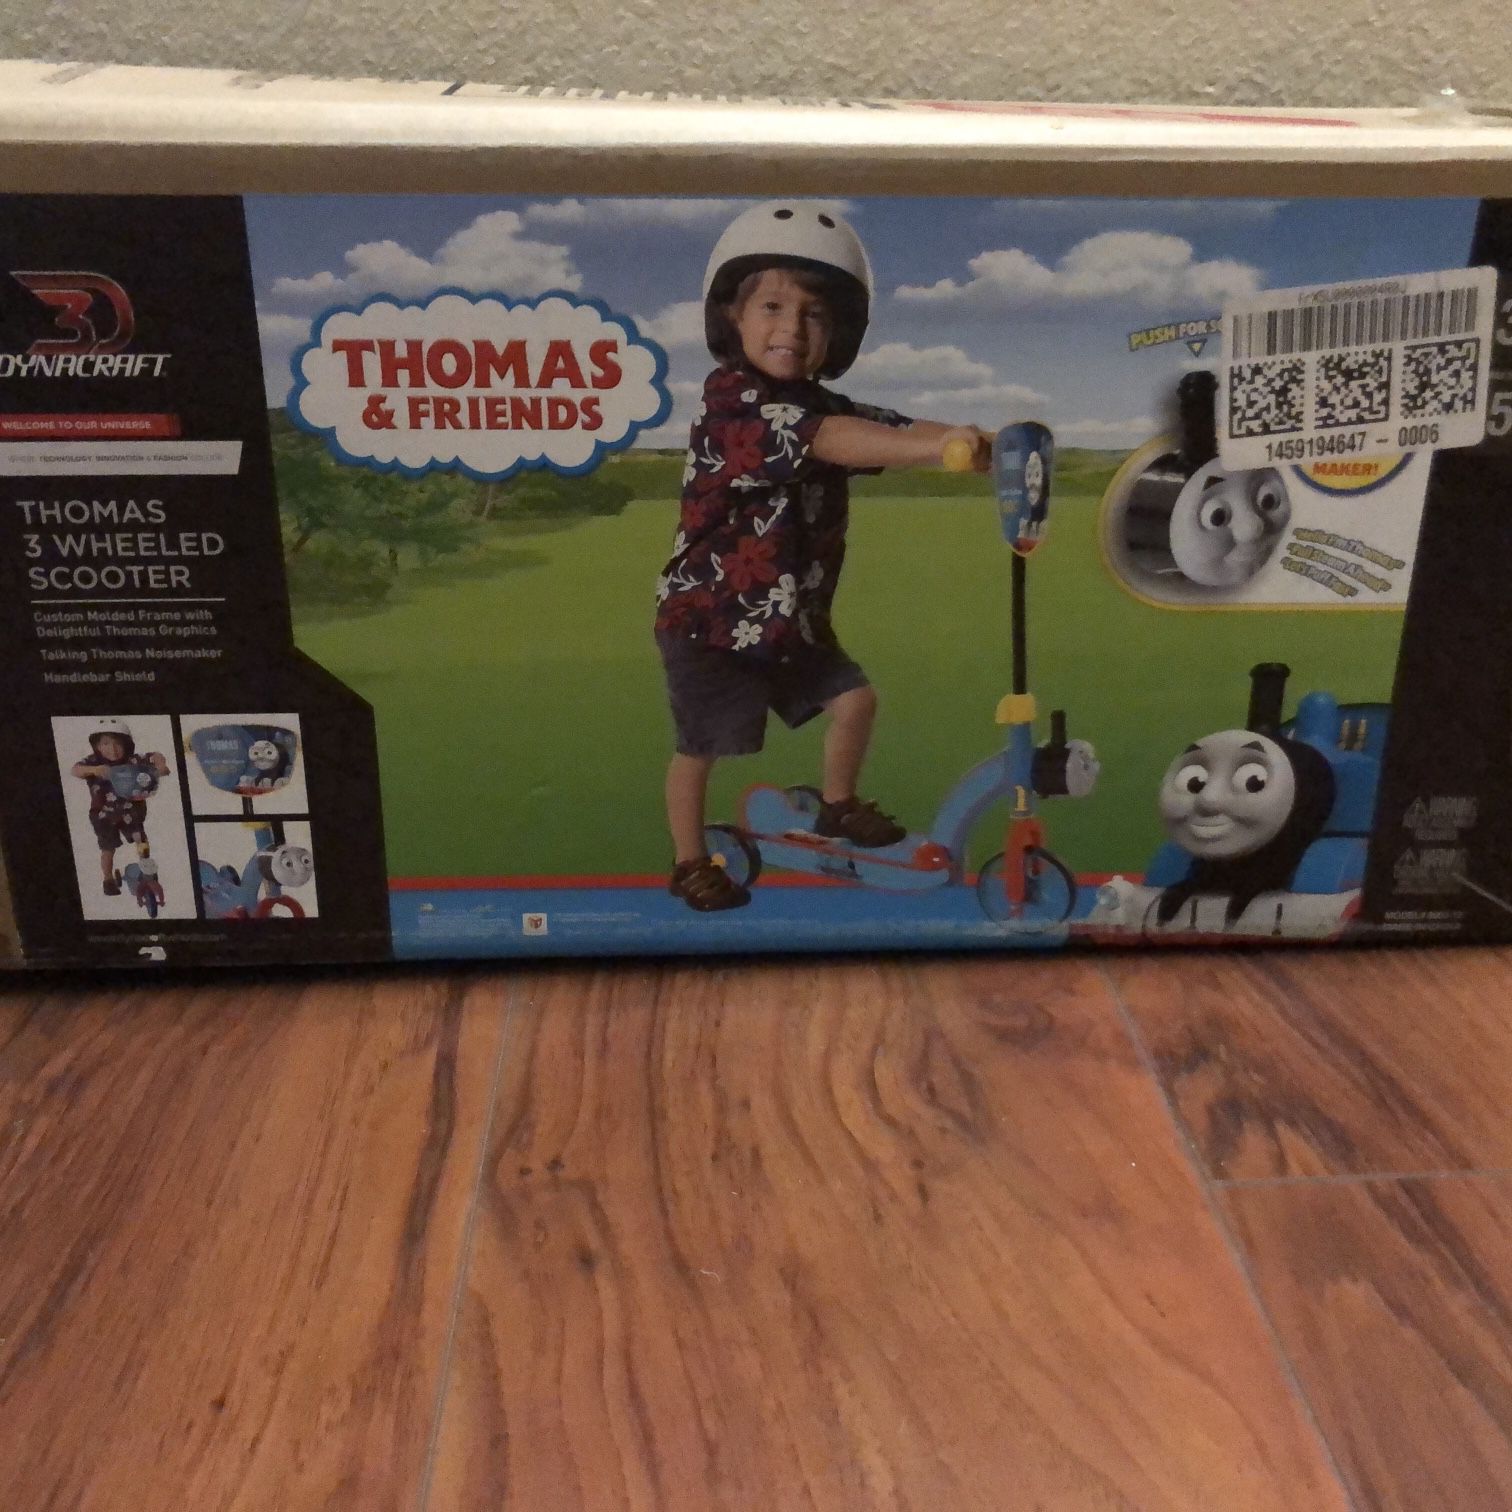 Thomas And Friends Dynacraft 3-wheel Scooter Brand New And Sealed Go